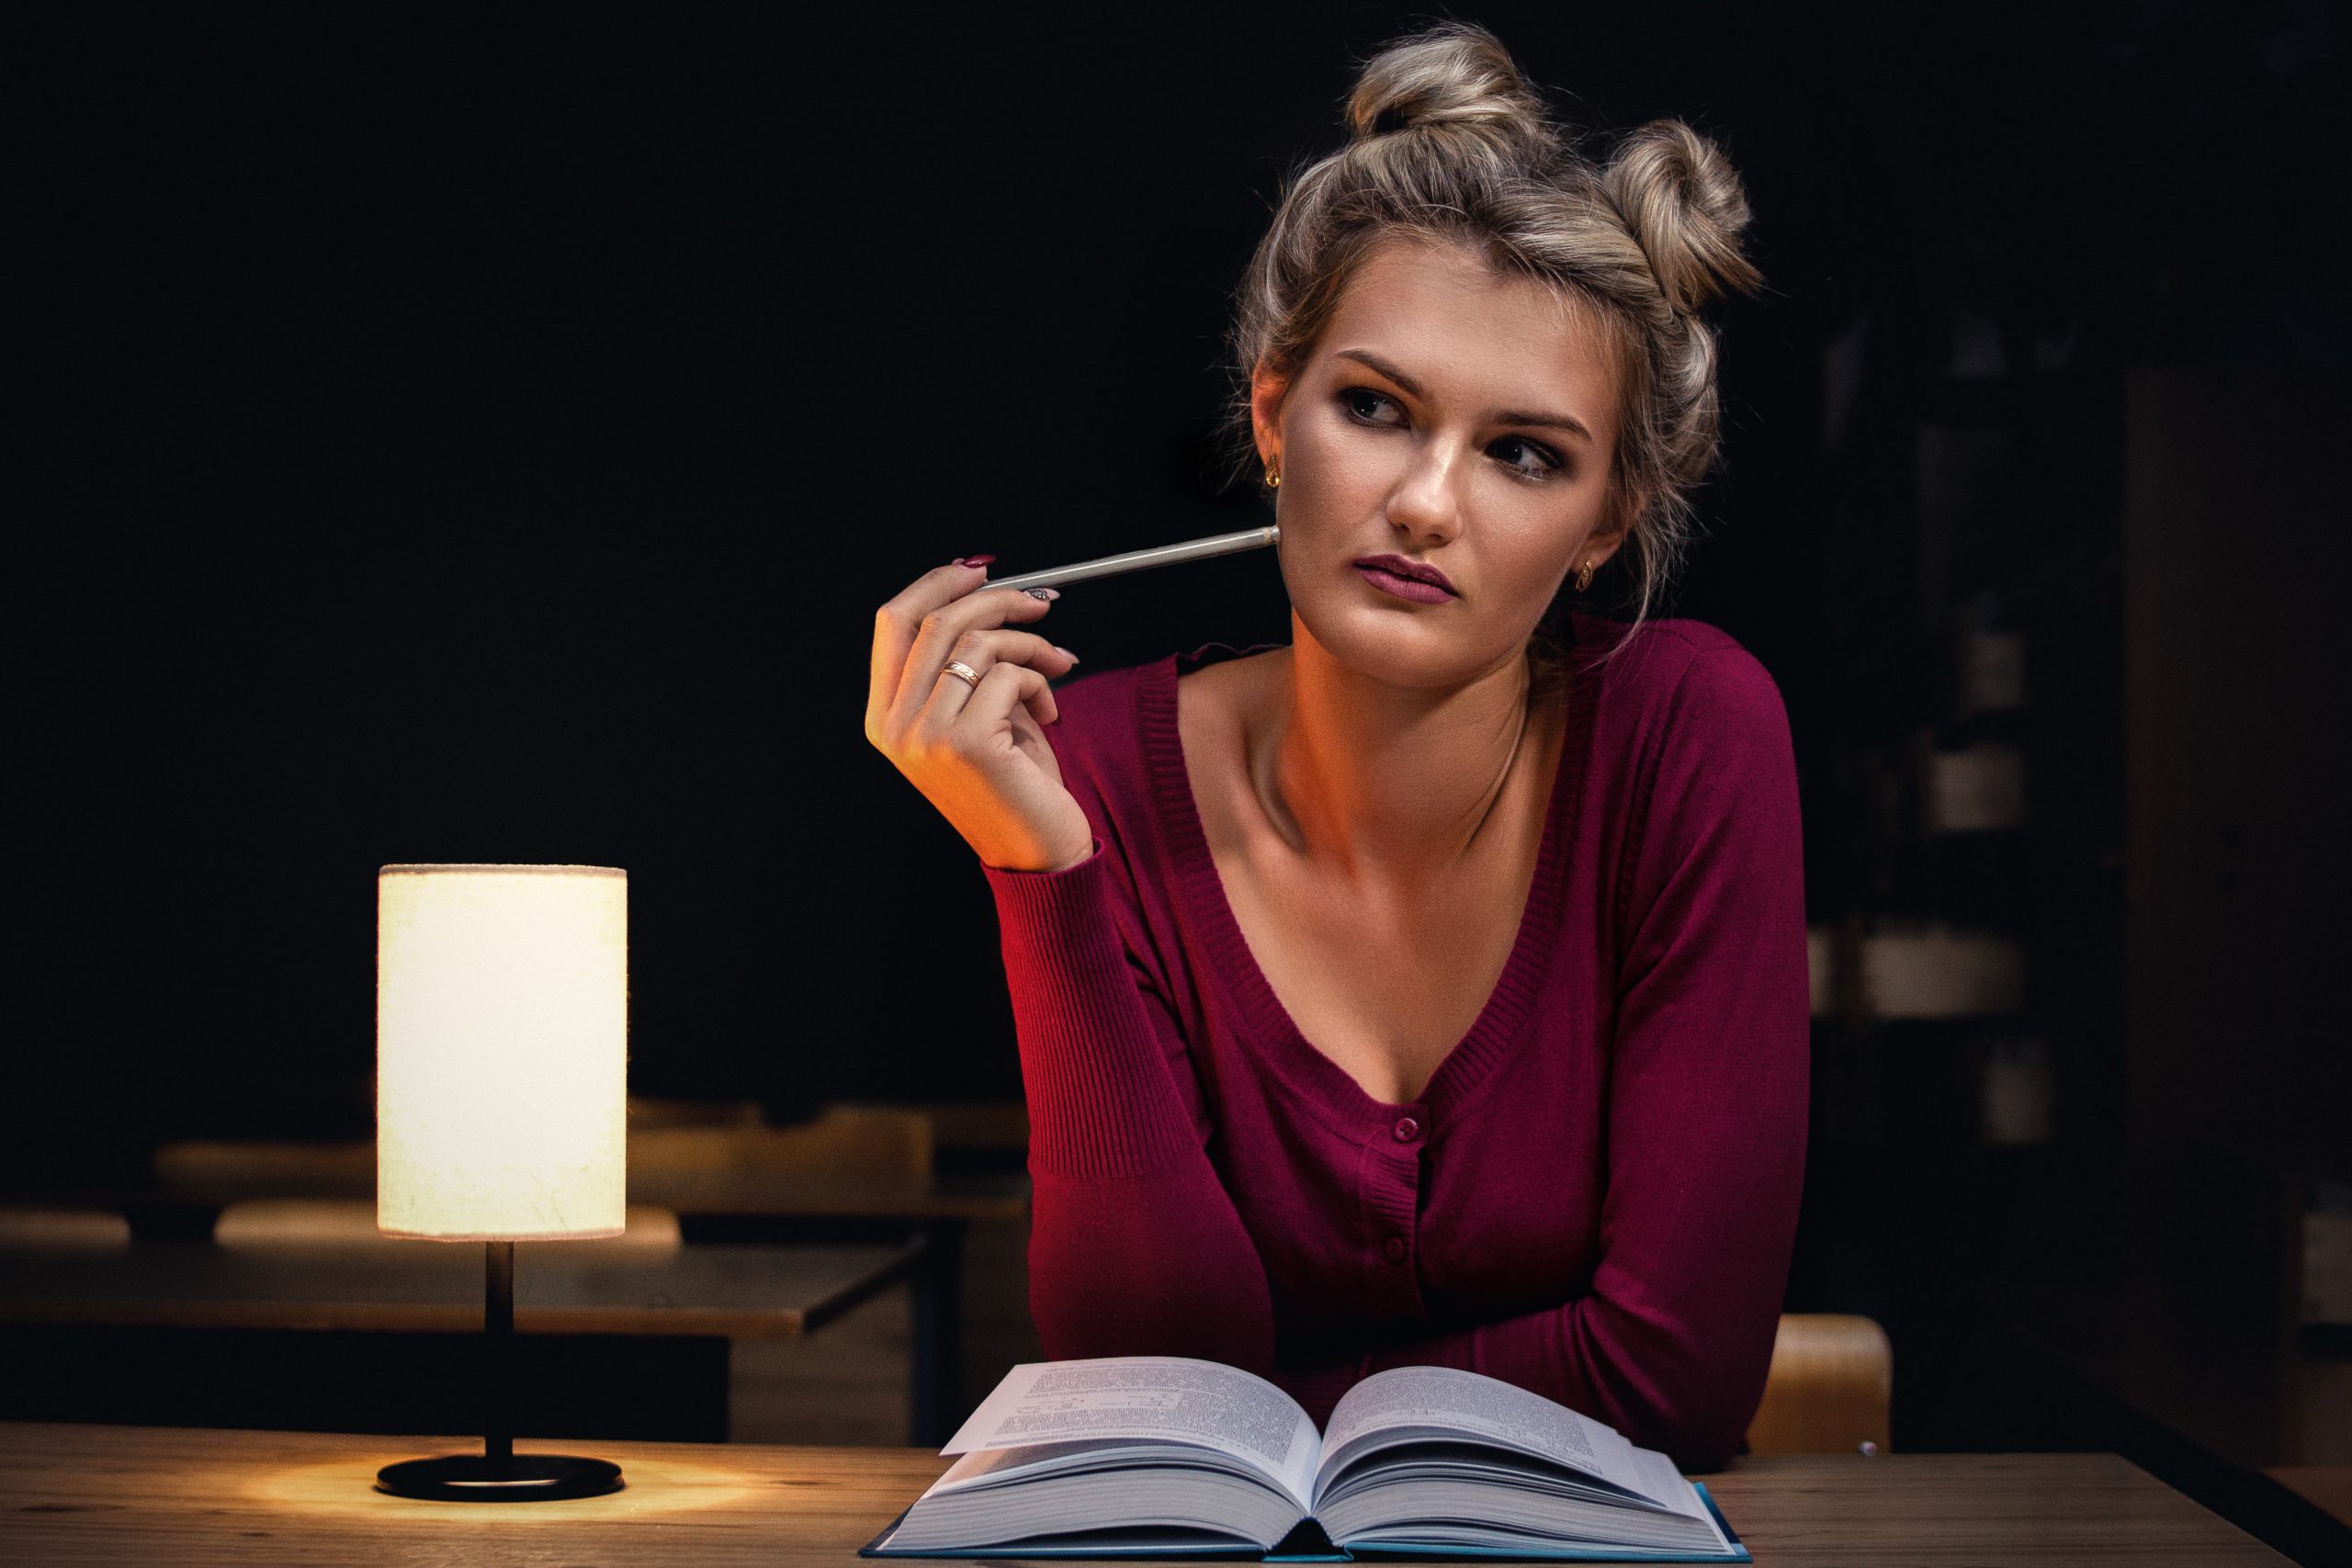 woman thinking in front of book